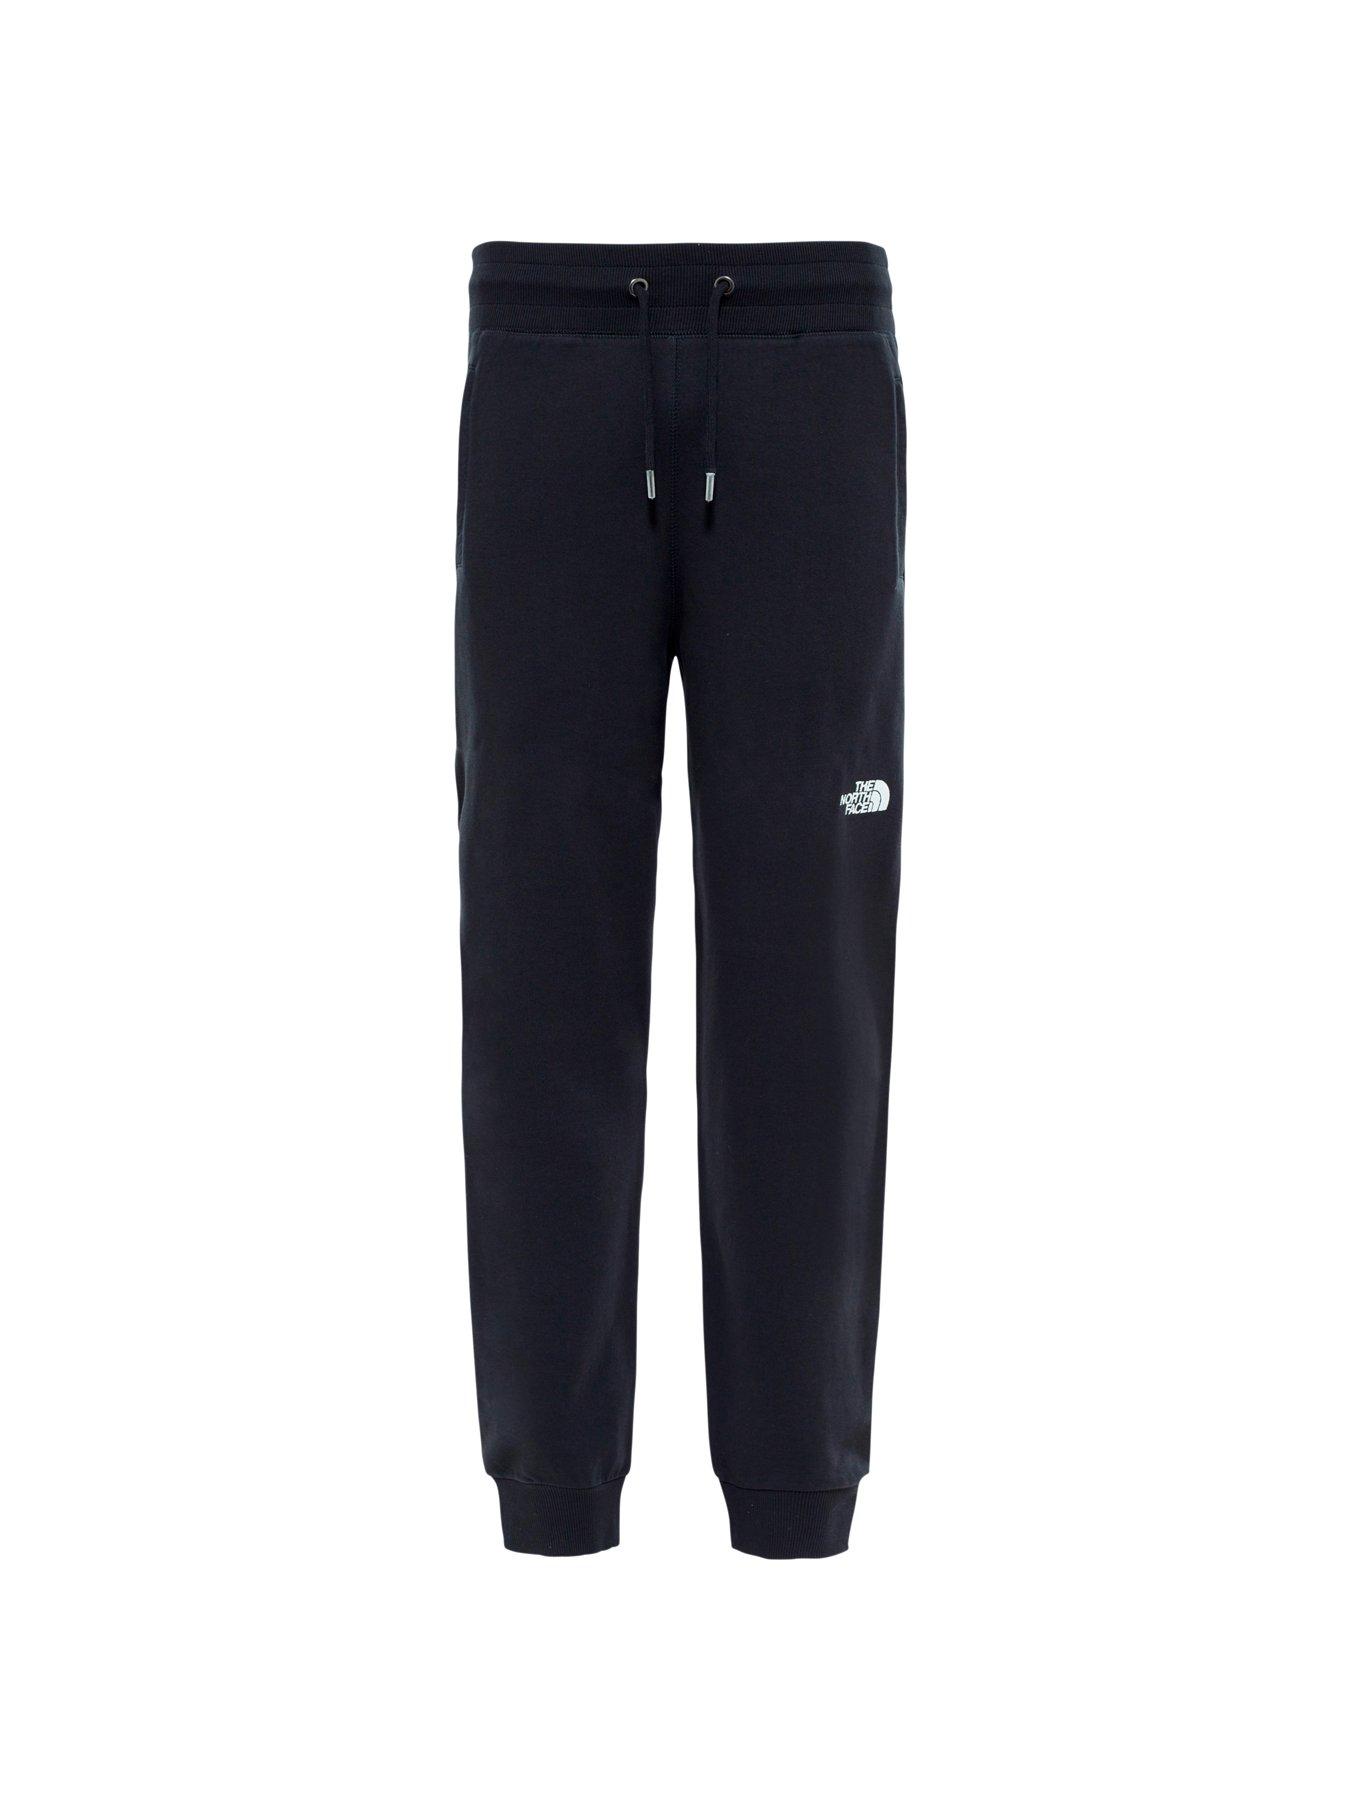 the north face mens tracksuit bottoms